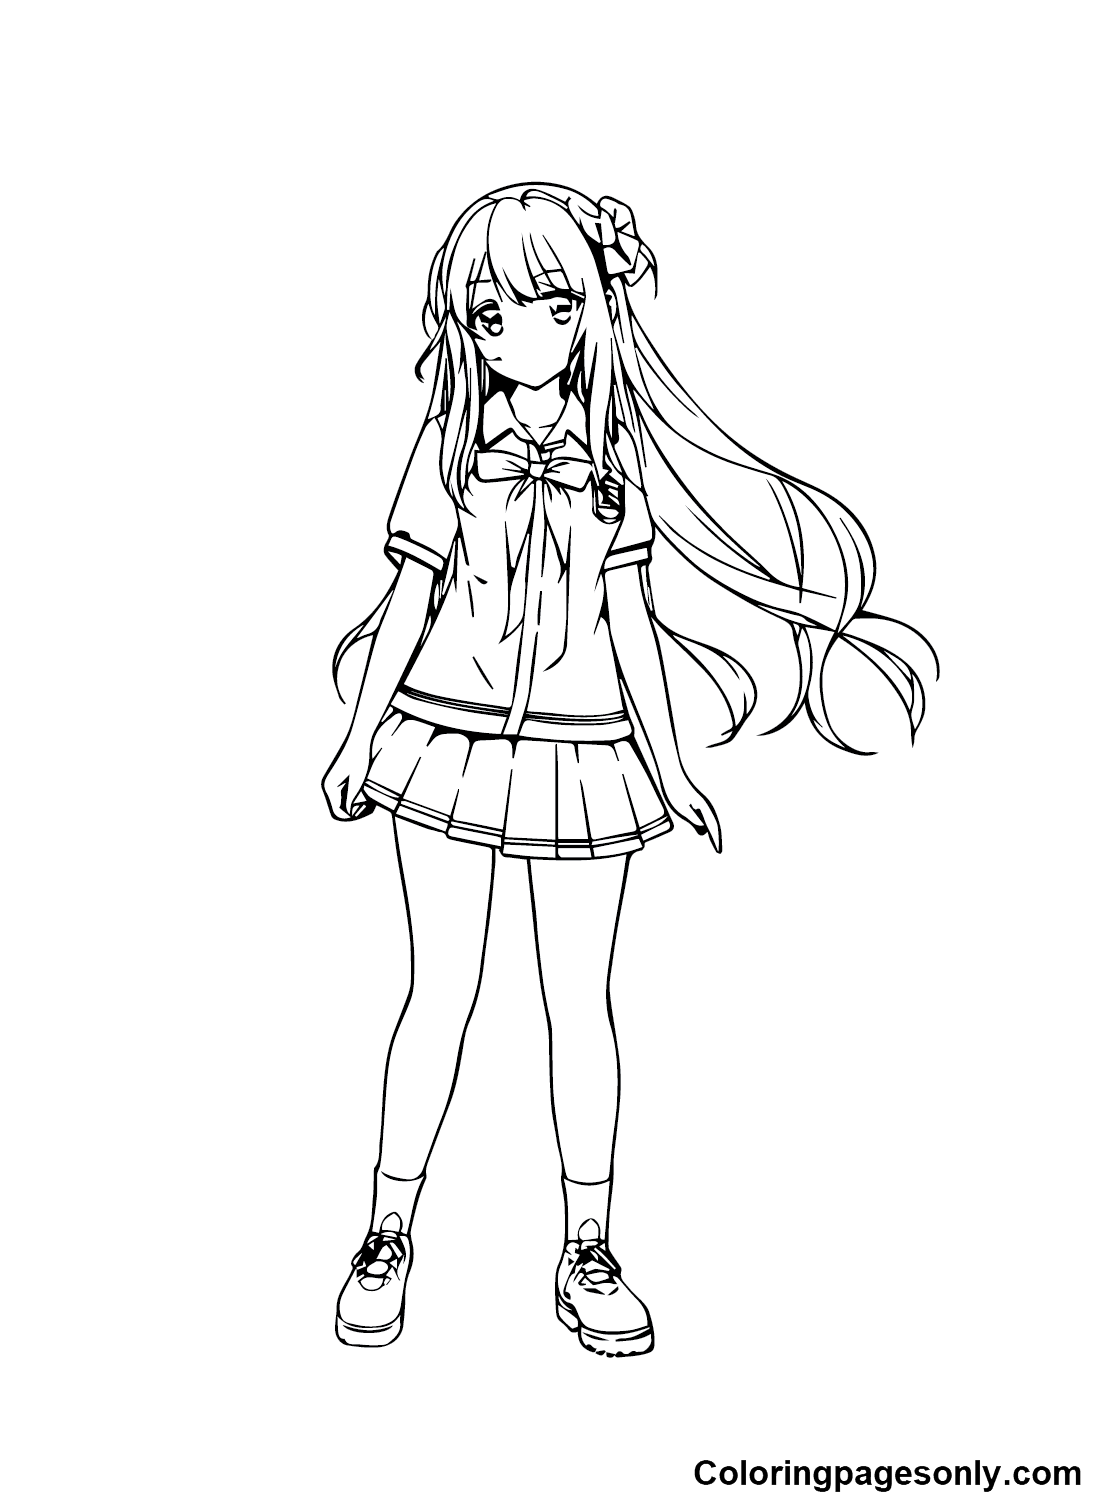 Anime girl coloring pages printable for free download